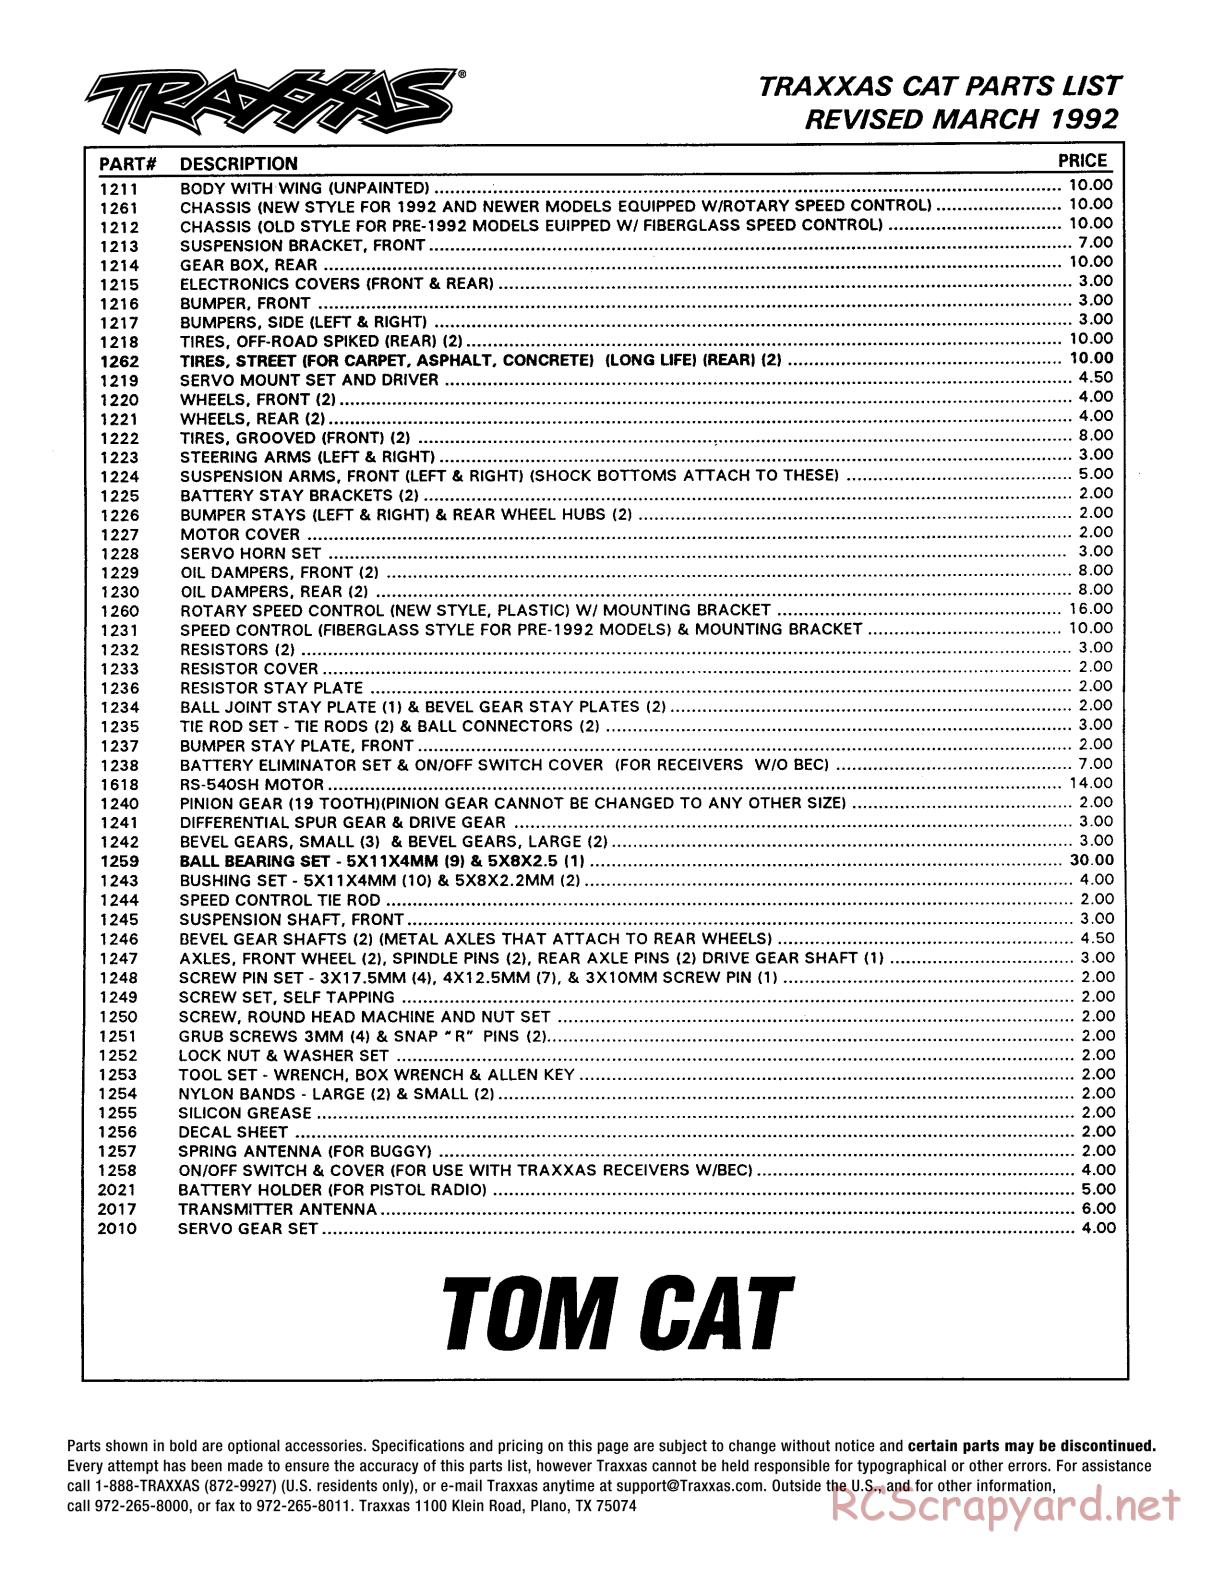 Traxxas - Tom-Cat (1995) - Parts List - Page 1